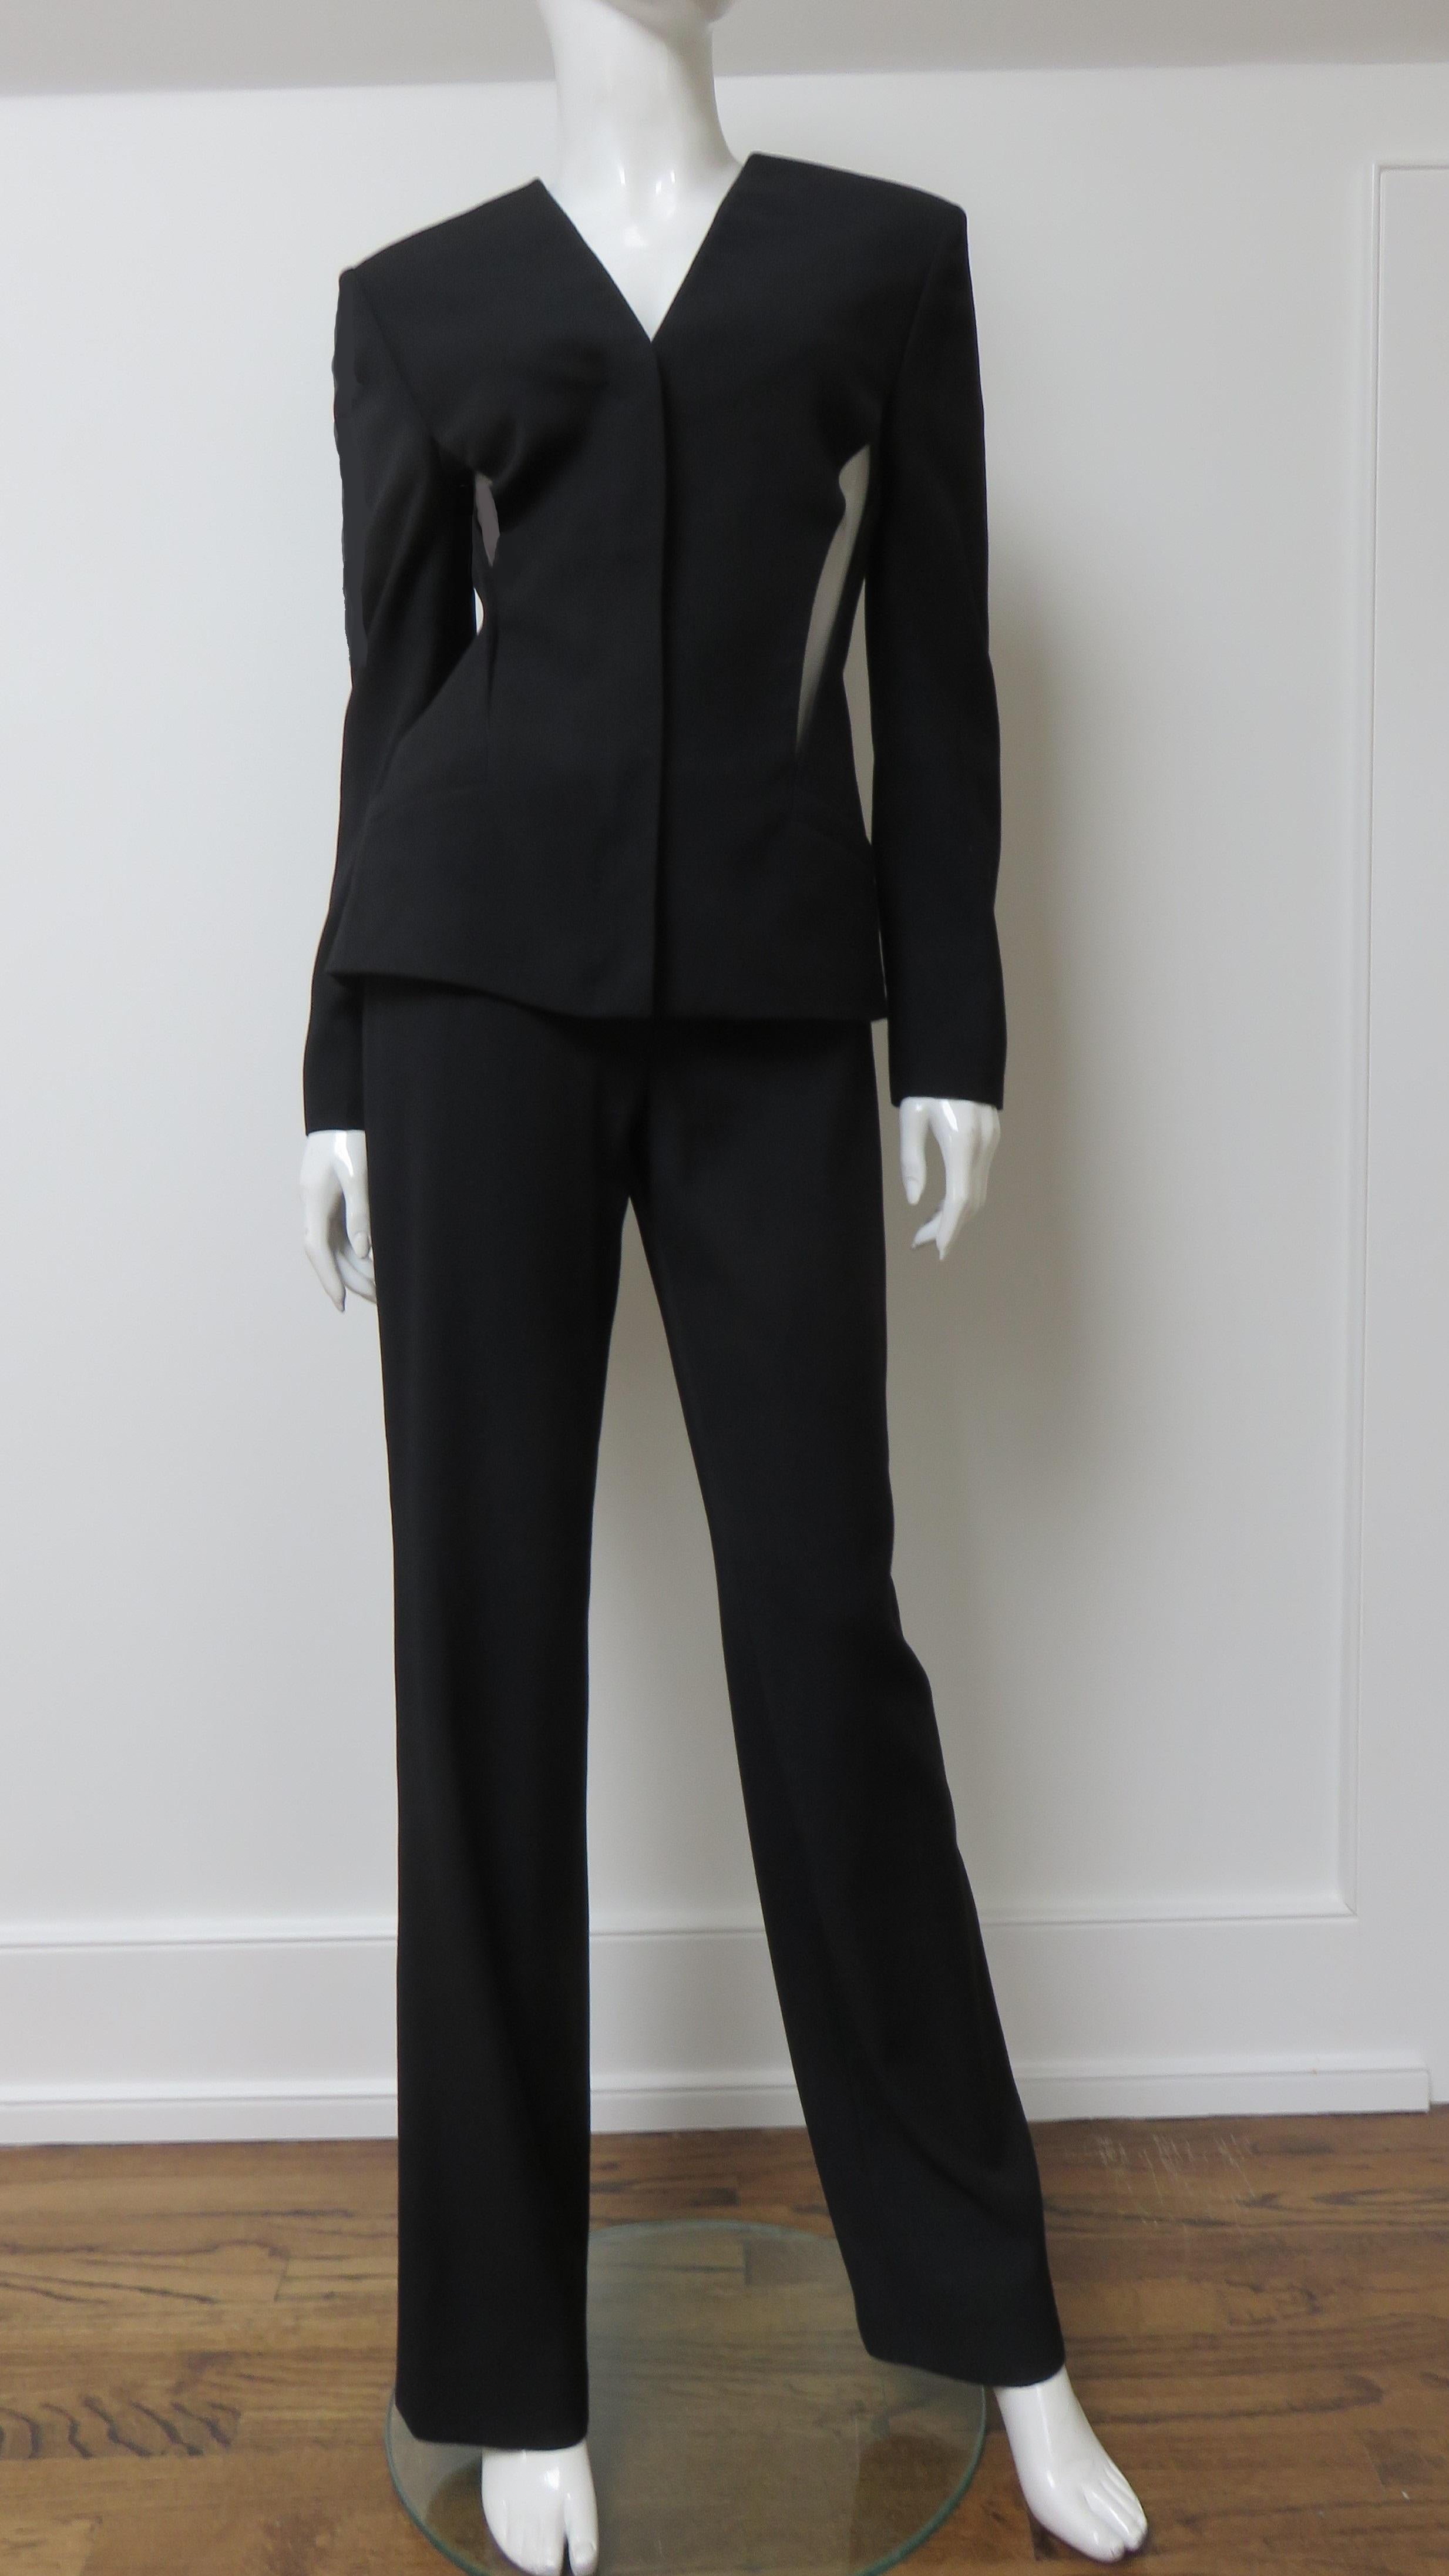 A gorgeous black silk pant suit from Gianni Versace Couture. The jacket has a V neckline, princess seaming for a flattering fit, lightly padded shoulders, a front zipper closing, and a mesh covered wedge cut out from underarm to pocket on each side.